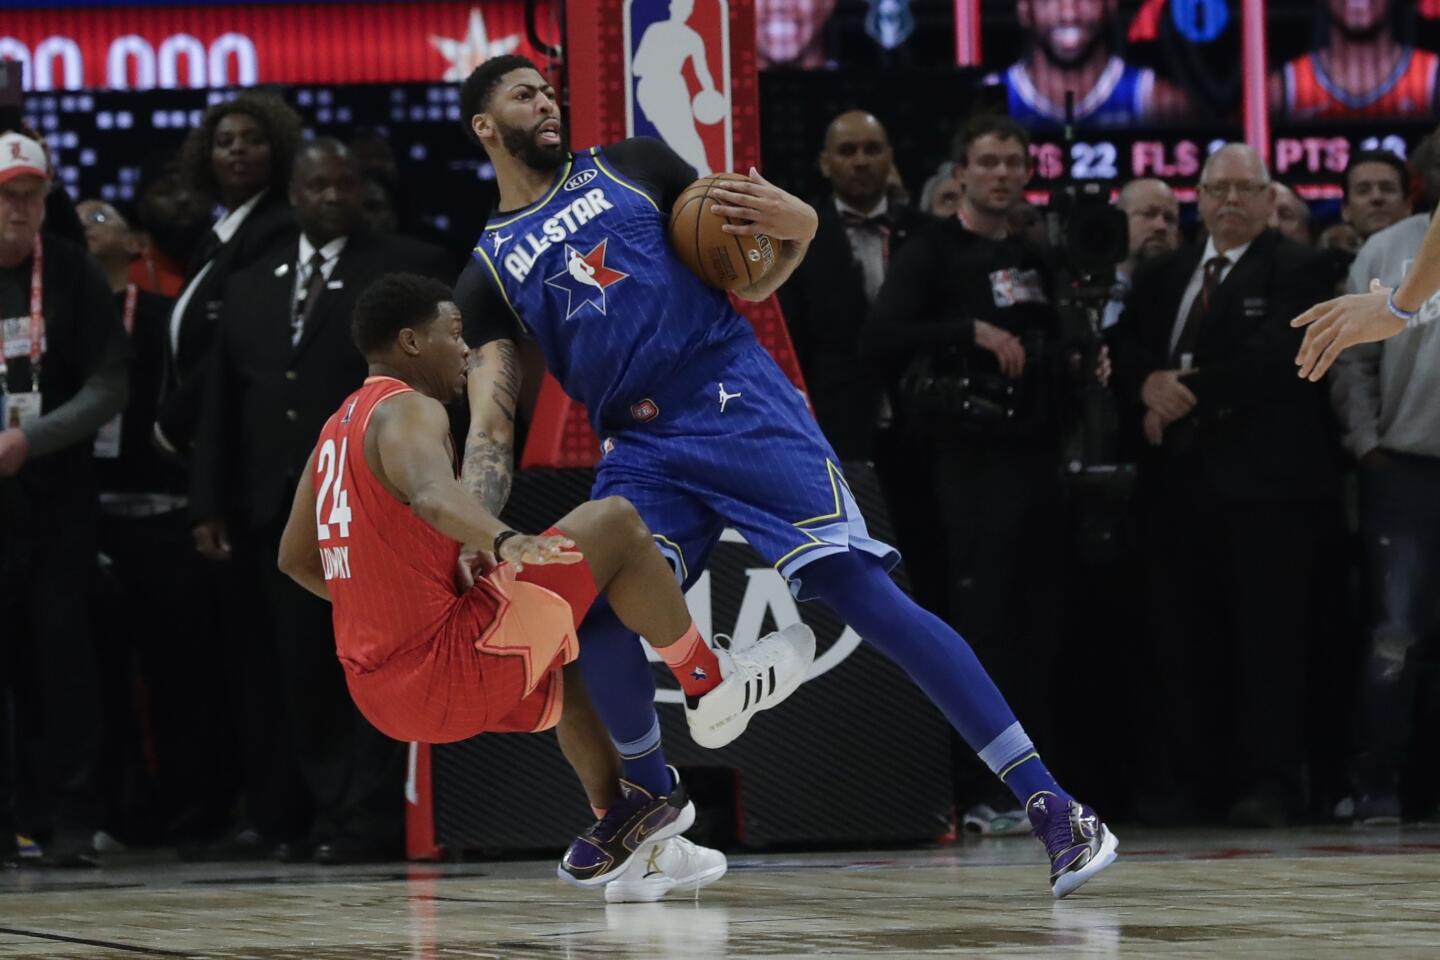 Lakers forward Anthony Davis is fouled by Raptors guard Kyle Lowry to set up the winning free throw during the 69th NBA All-Star game at the United Center in Chicago on Feb. 16, 2020.